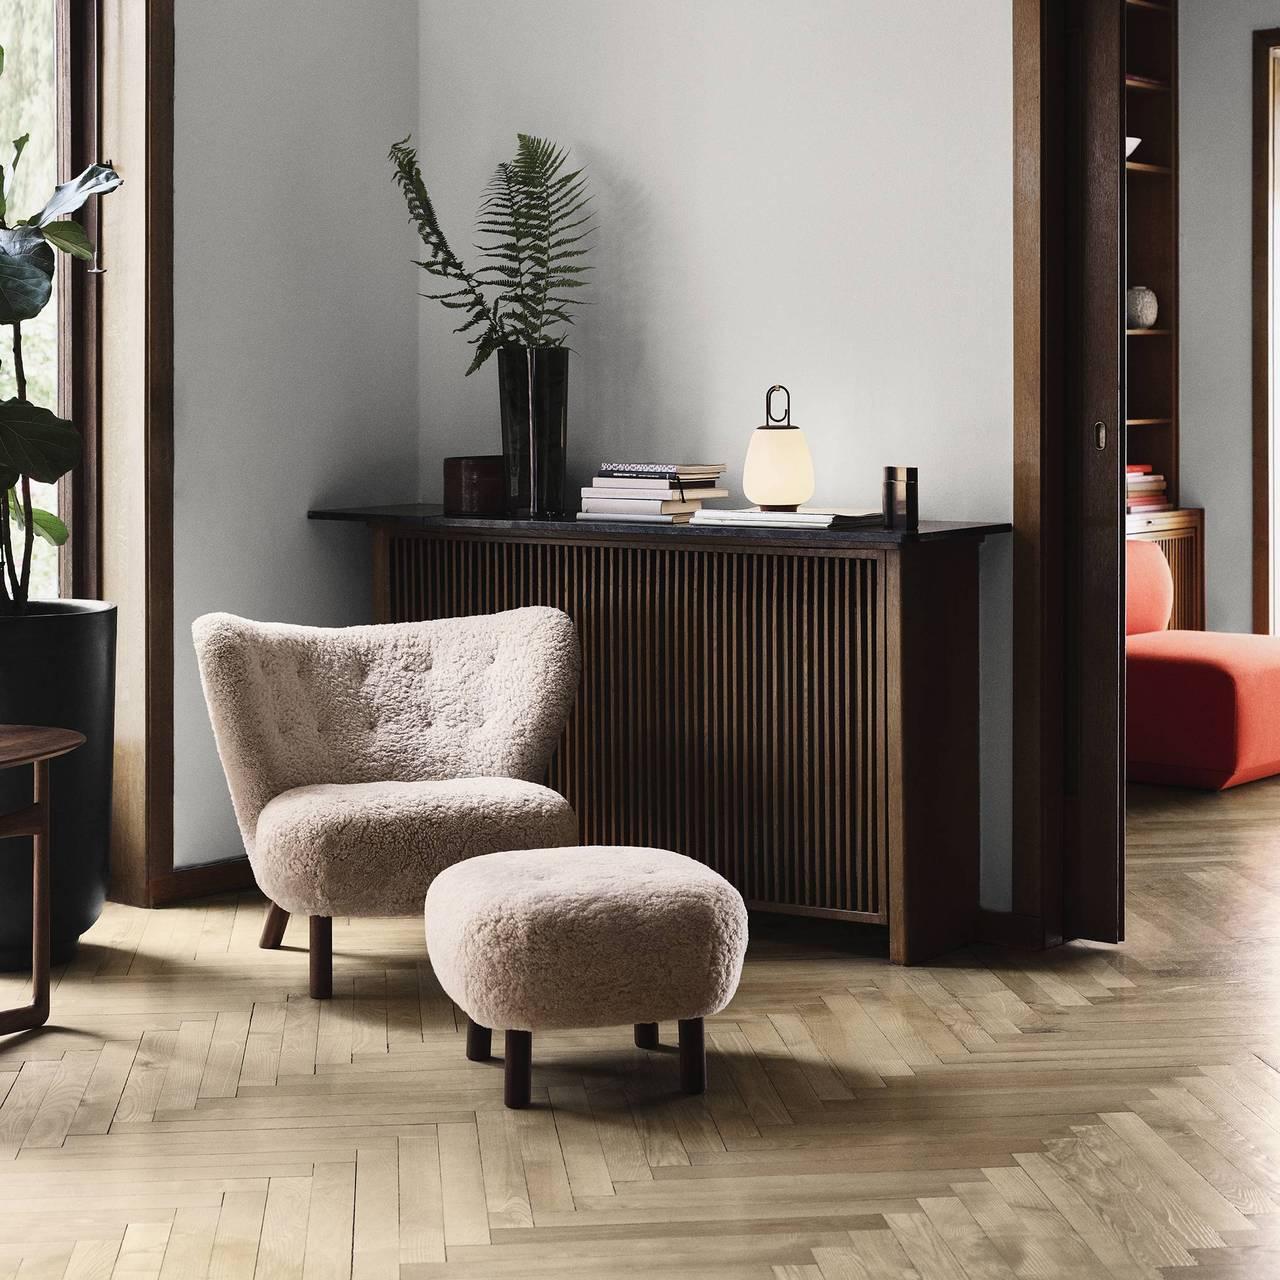 Initially introduced back in 1938, Little Petra won instant praise at the Copenhagen Cabinetmakers Guild Exhibition, subsequently winning awards at exhibits in New York and Berlin. It’s one of just a few designs by architect Viggo Boesen, who became